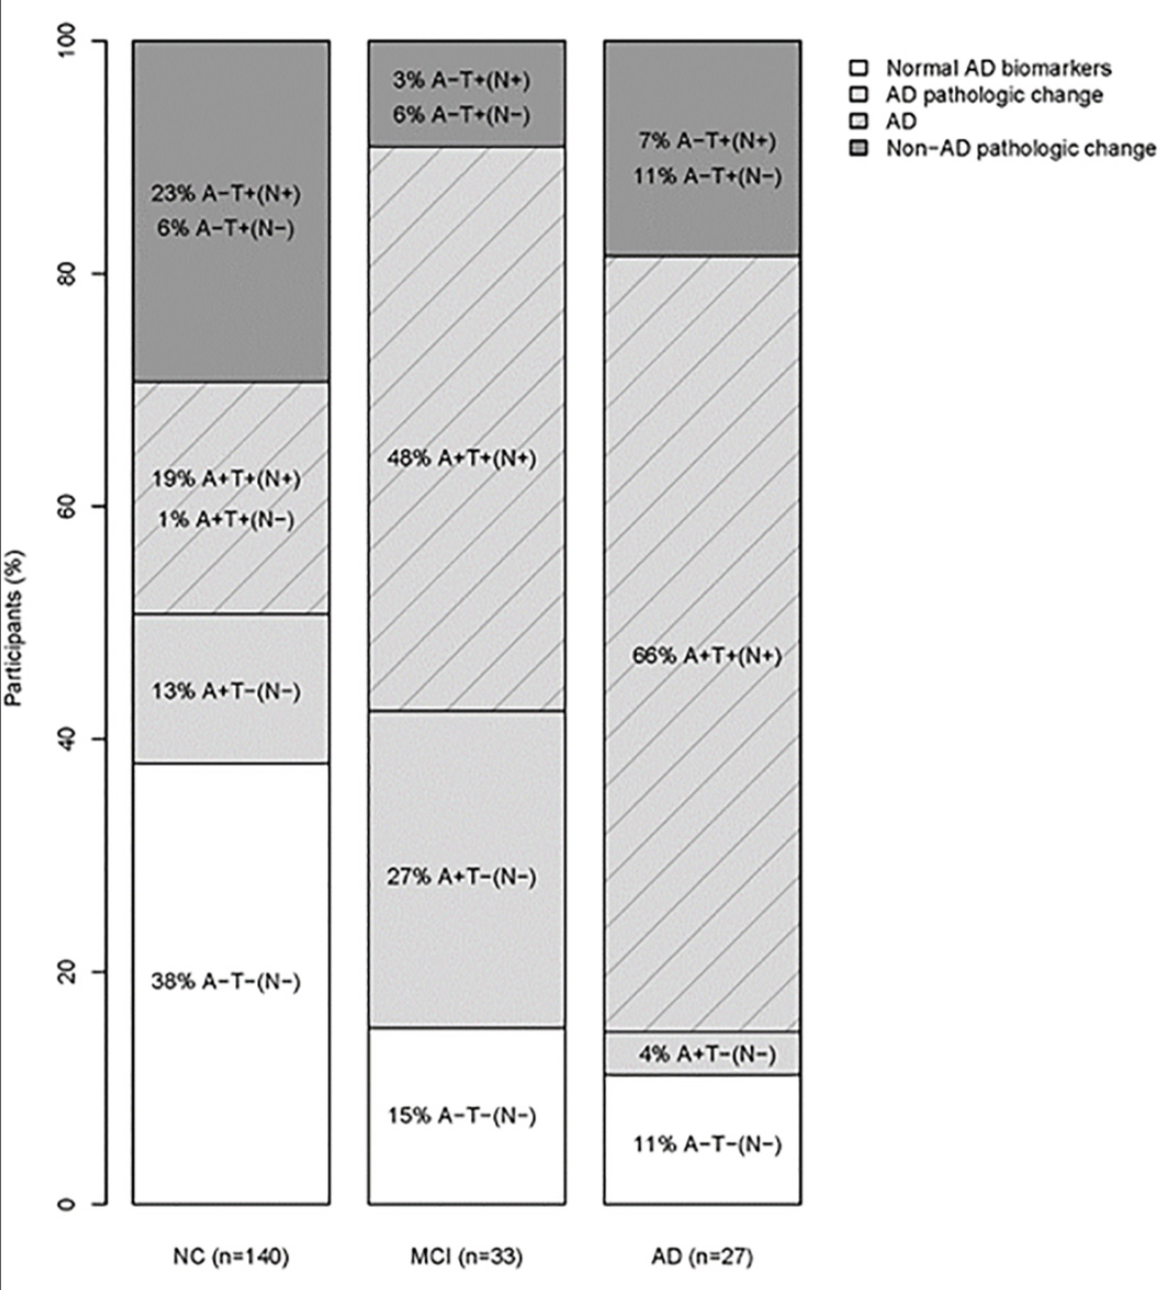 Figure 1. Prevalence of the AT(N) groups across clinical classifications